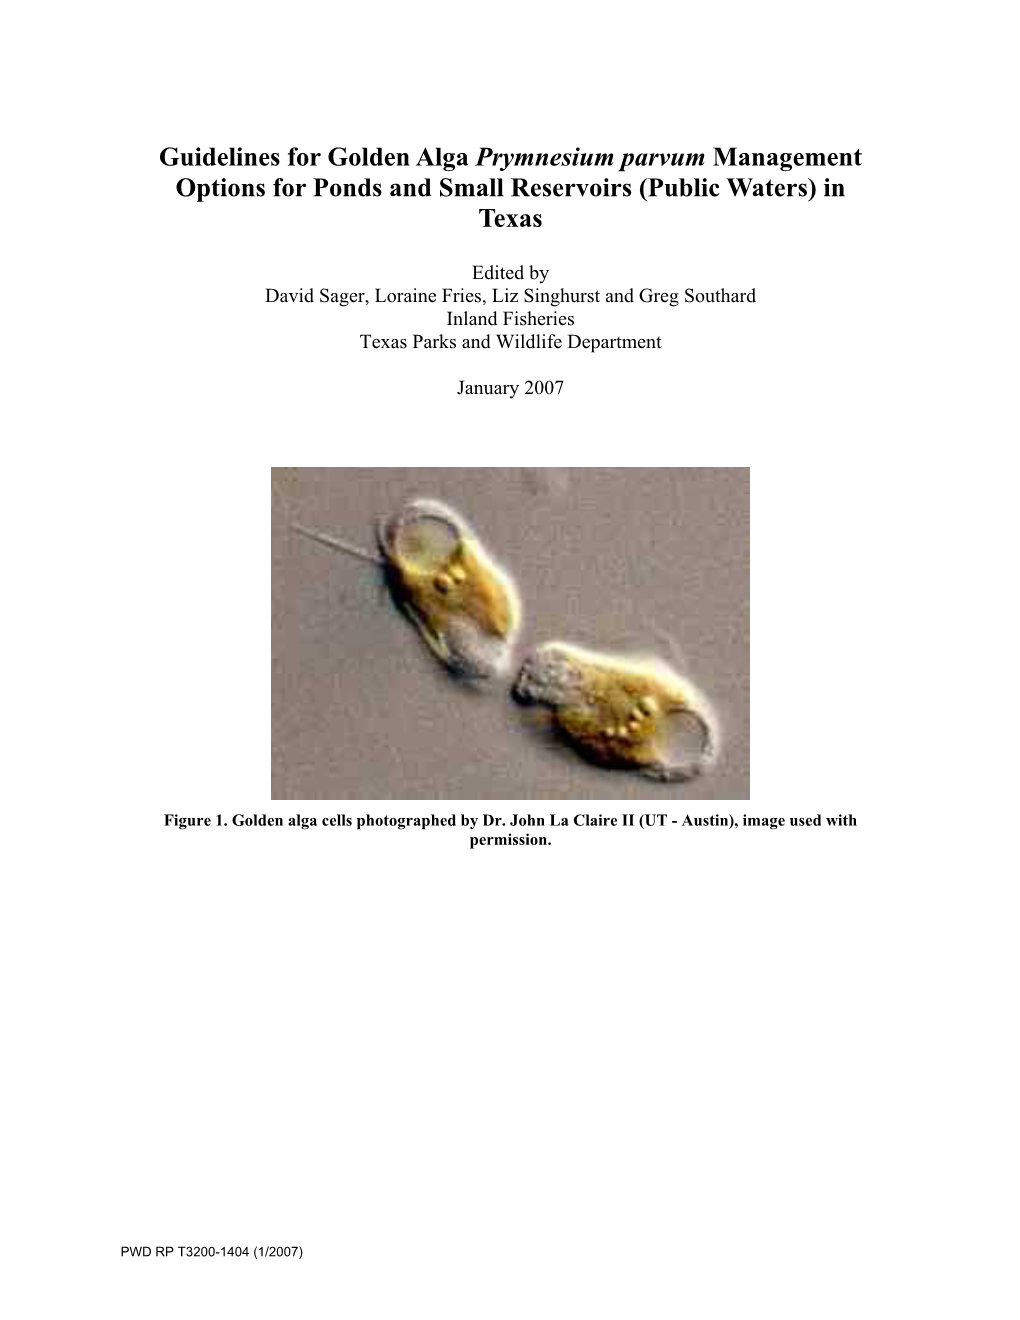 Guidelines for Golden Alga Prymnesium Parvum Management Options for Ponds and Small Reservoirs (Public Waters) in Texas